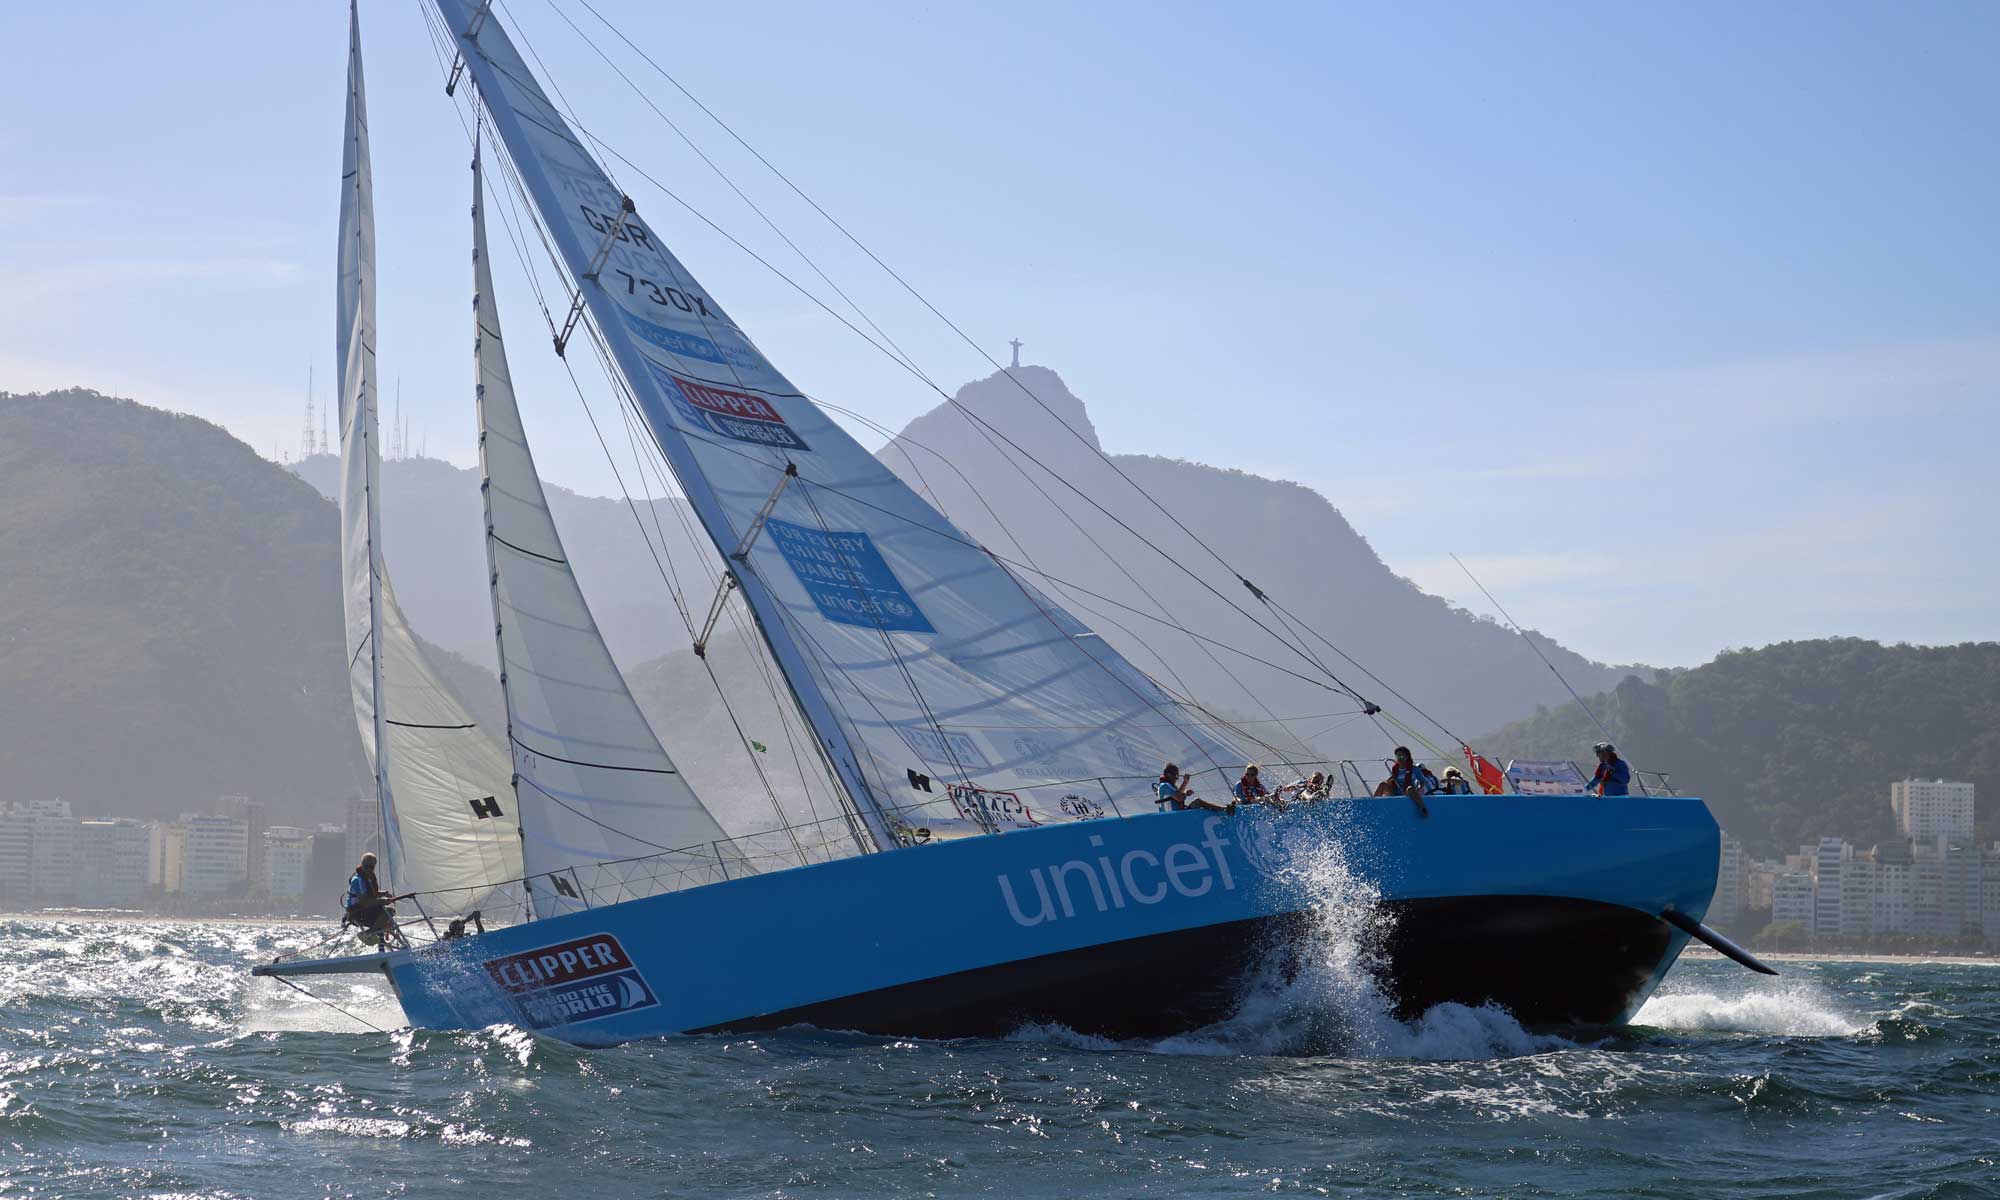 Join the Clipper round the world yacht race with Team Unicef